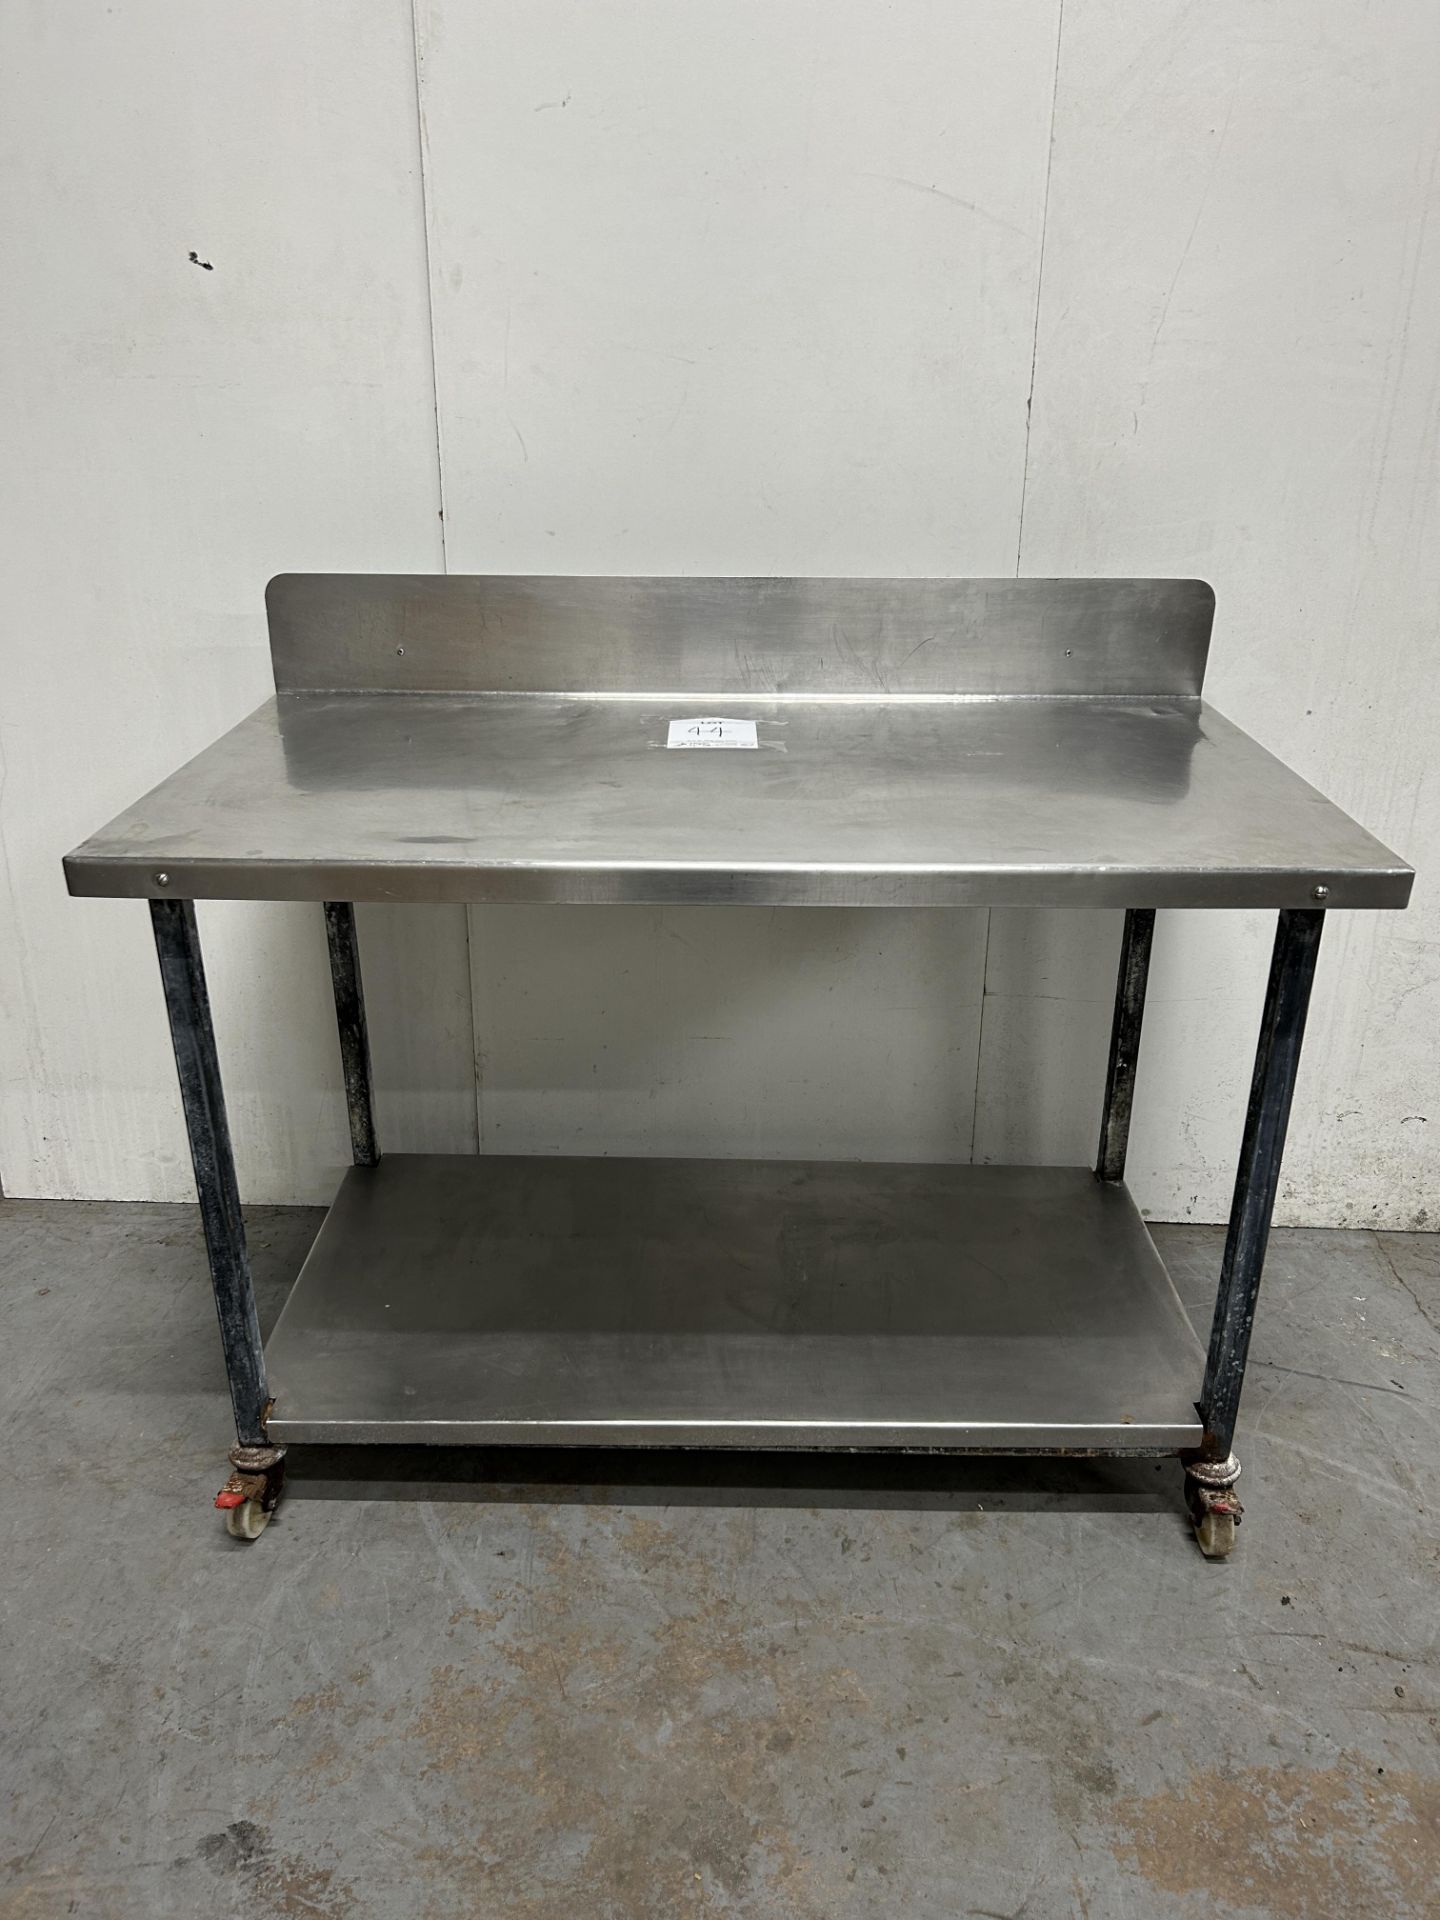 Stainless Steel Mobile Preparation Table w/ Undershelf | 122cm x 65cm x 100cm | LOCATED IN WHITEFIEL